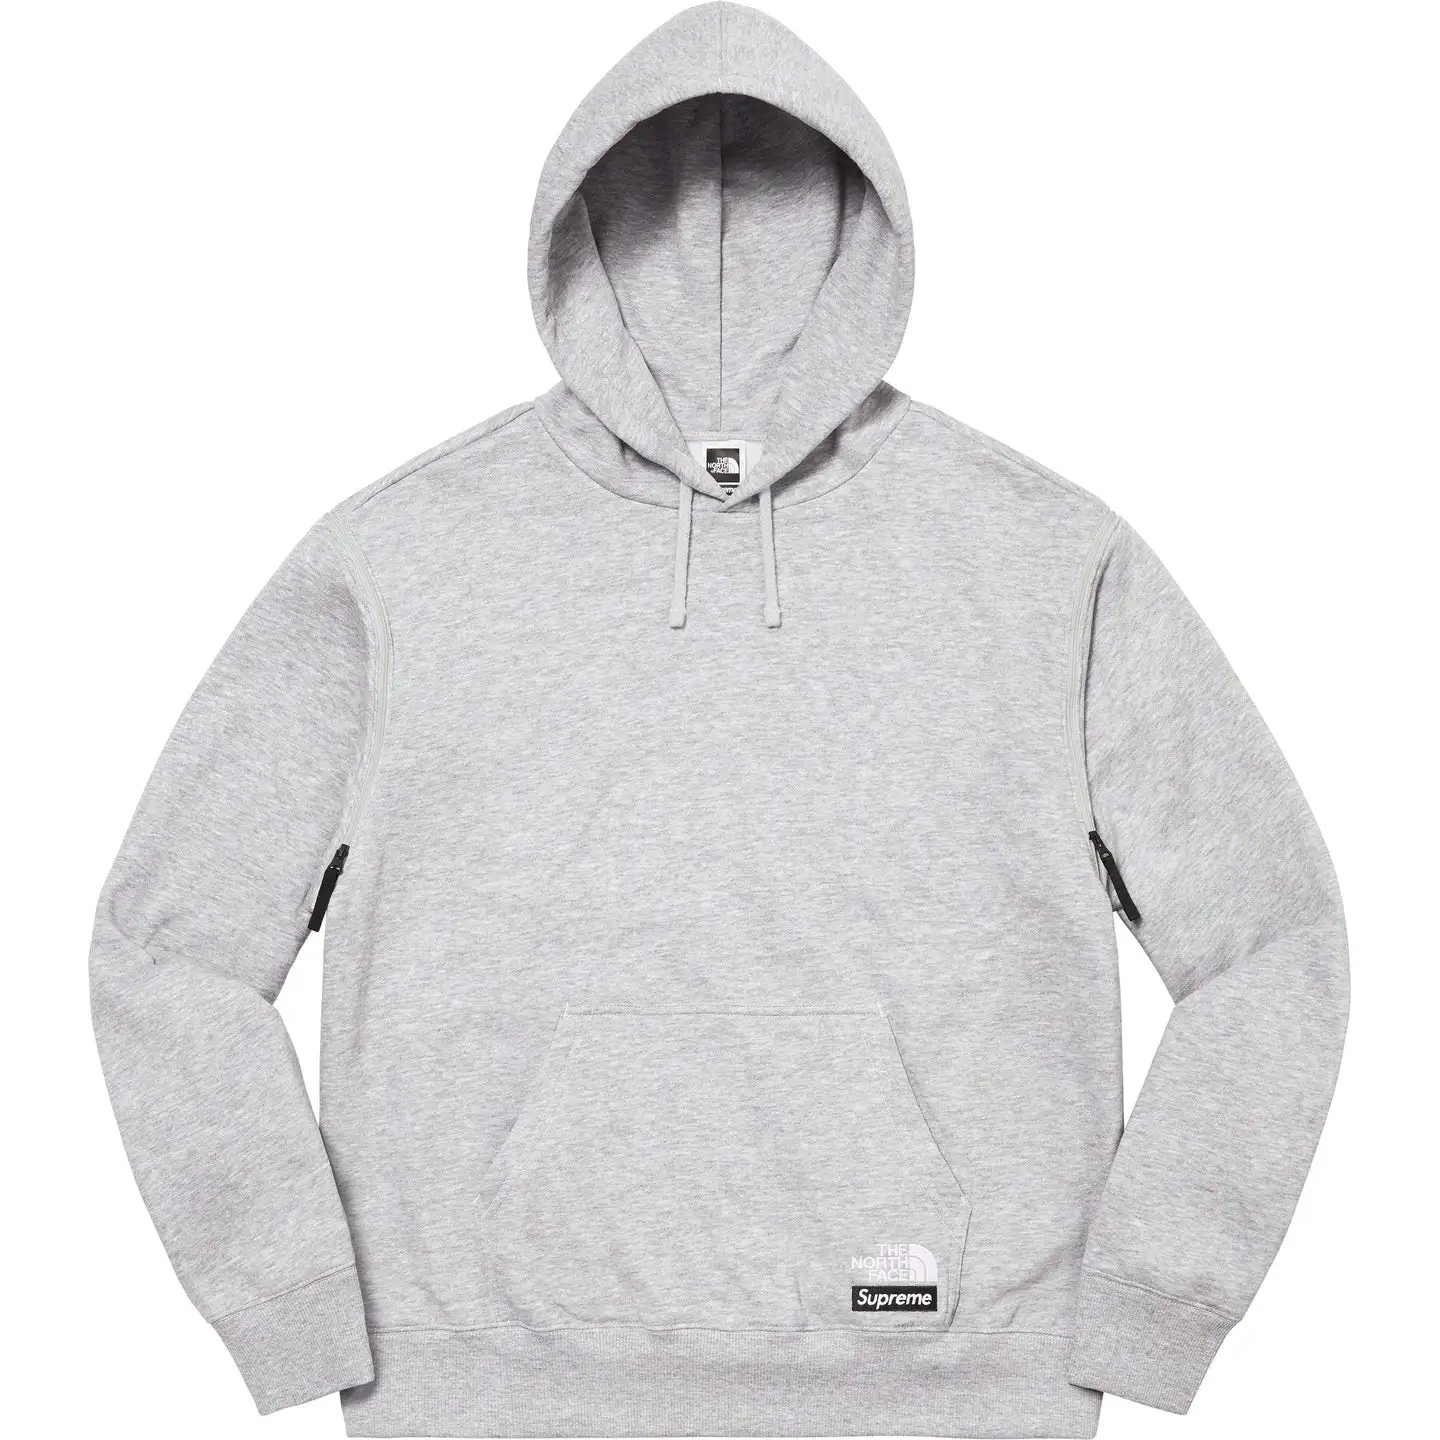 Supreme®/The North Face® Convertible Hooded Sweatshirt